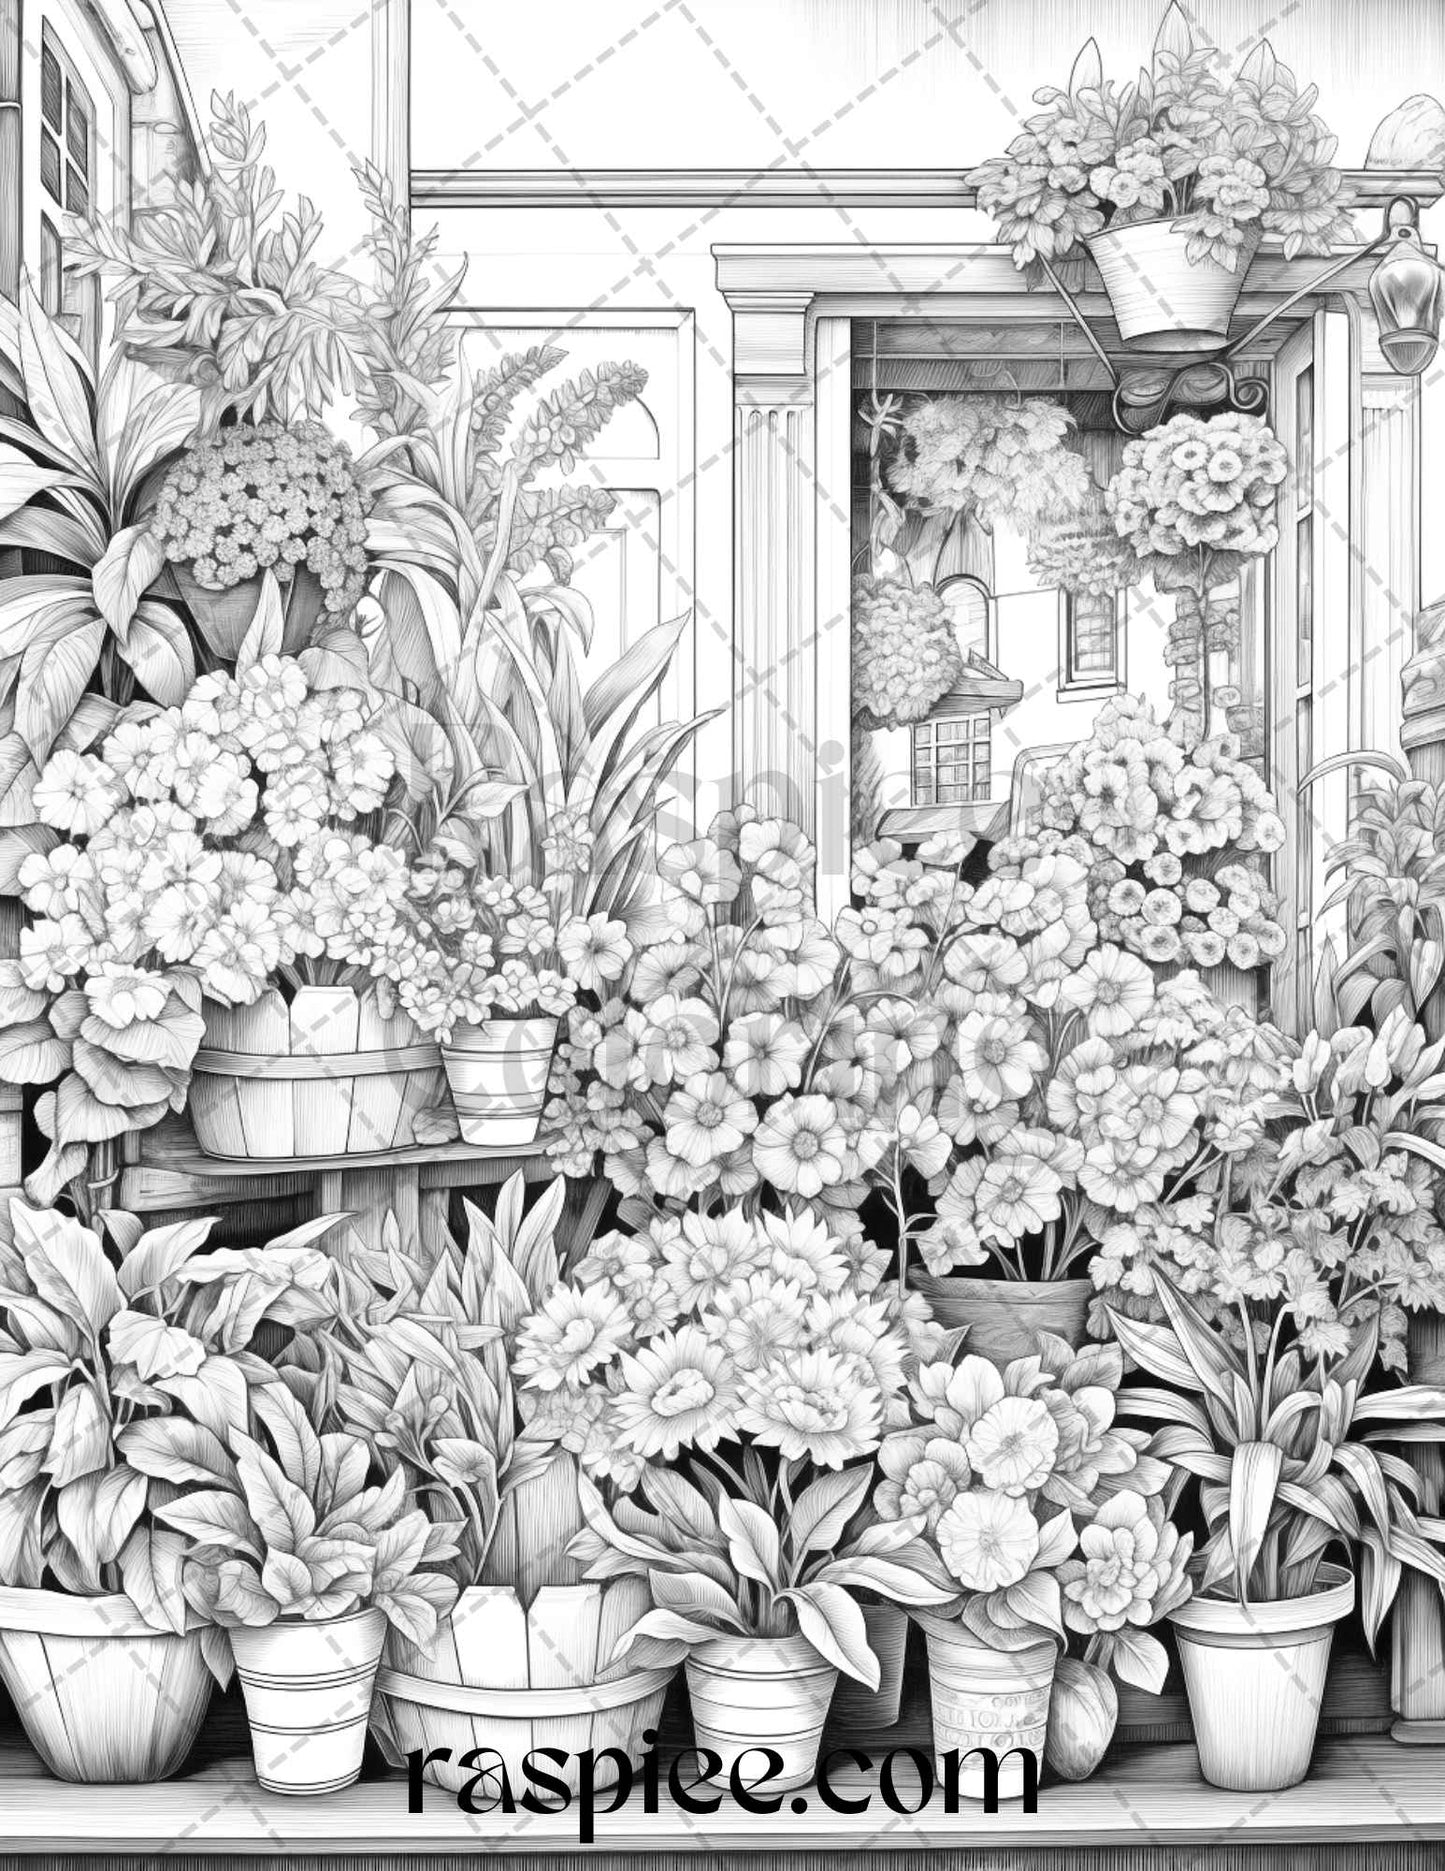 45 Flower Store Front Grayscale Coloring Pages Printable for Adults, PDF File Instant Download - raspiee